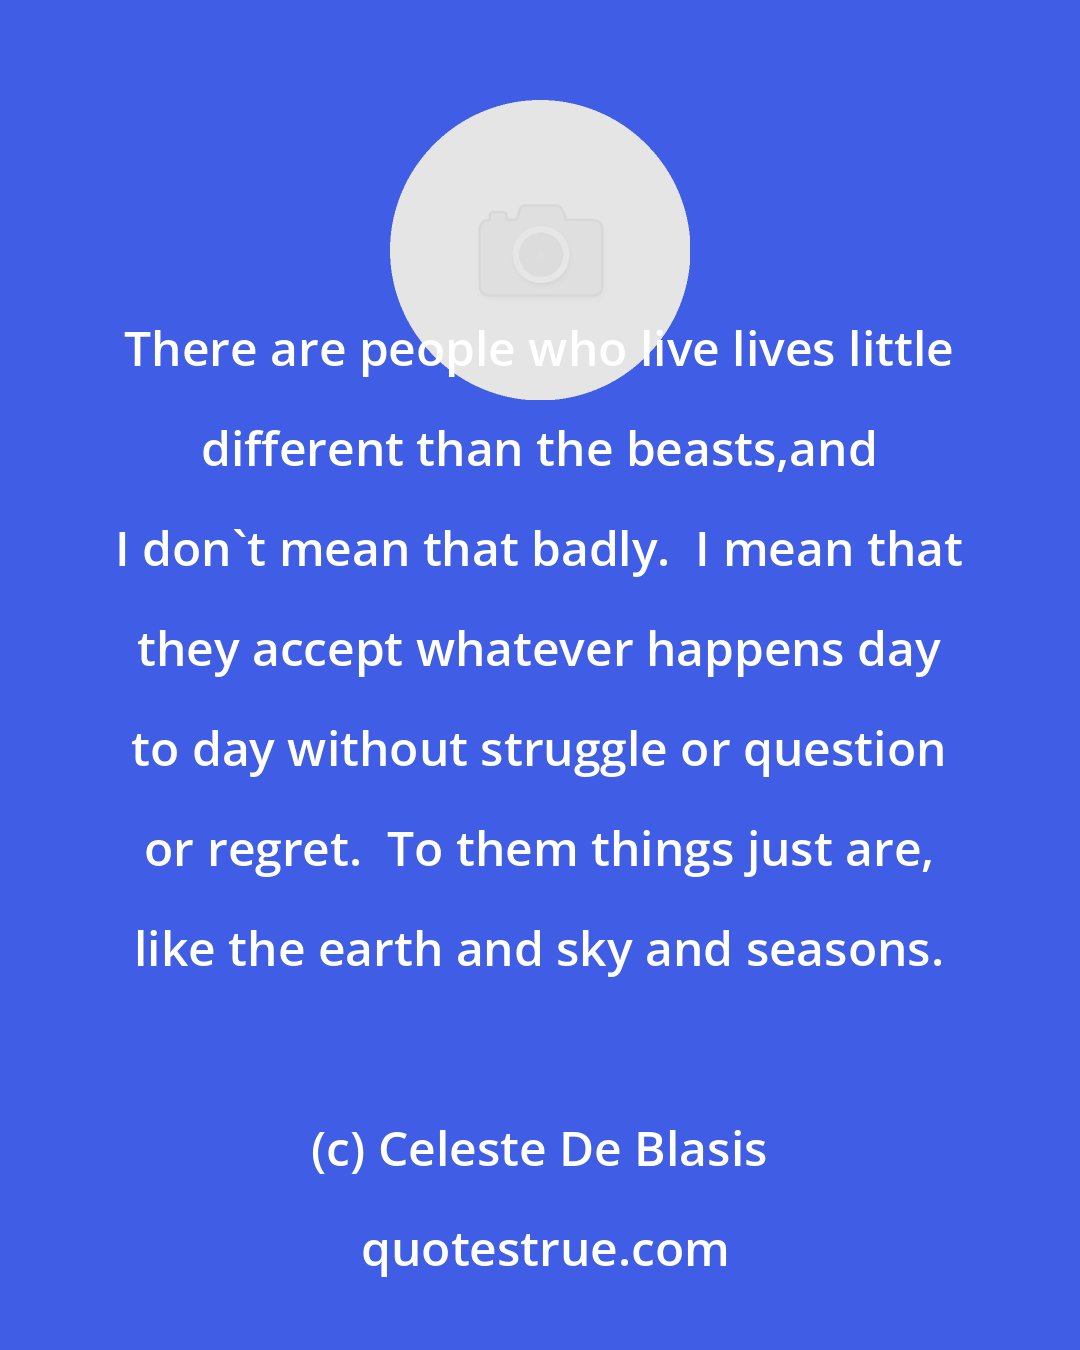 Celeste De Blasis: There are people who live lives little different than the beasts,and I don't mean that badly.  I mean that they accept whatever happens day to day without struggle or question or regret.  To them things just are, like the earth and sky and seasons.